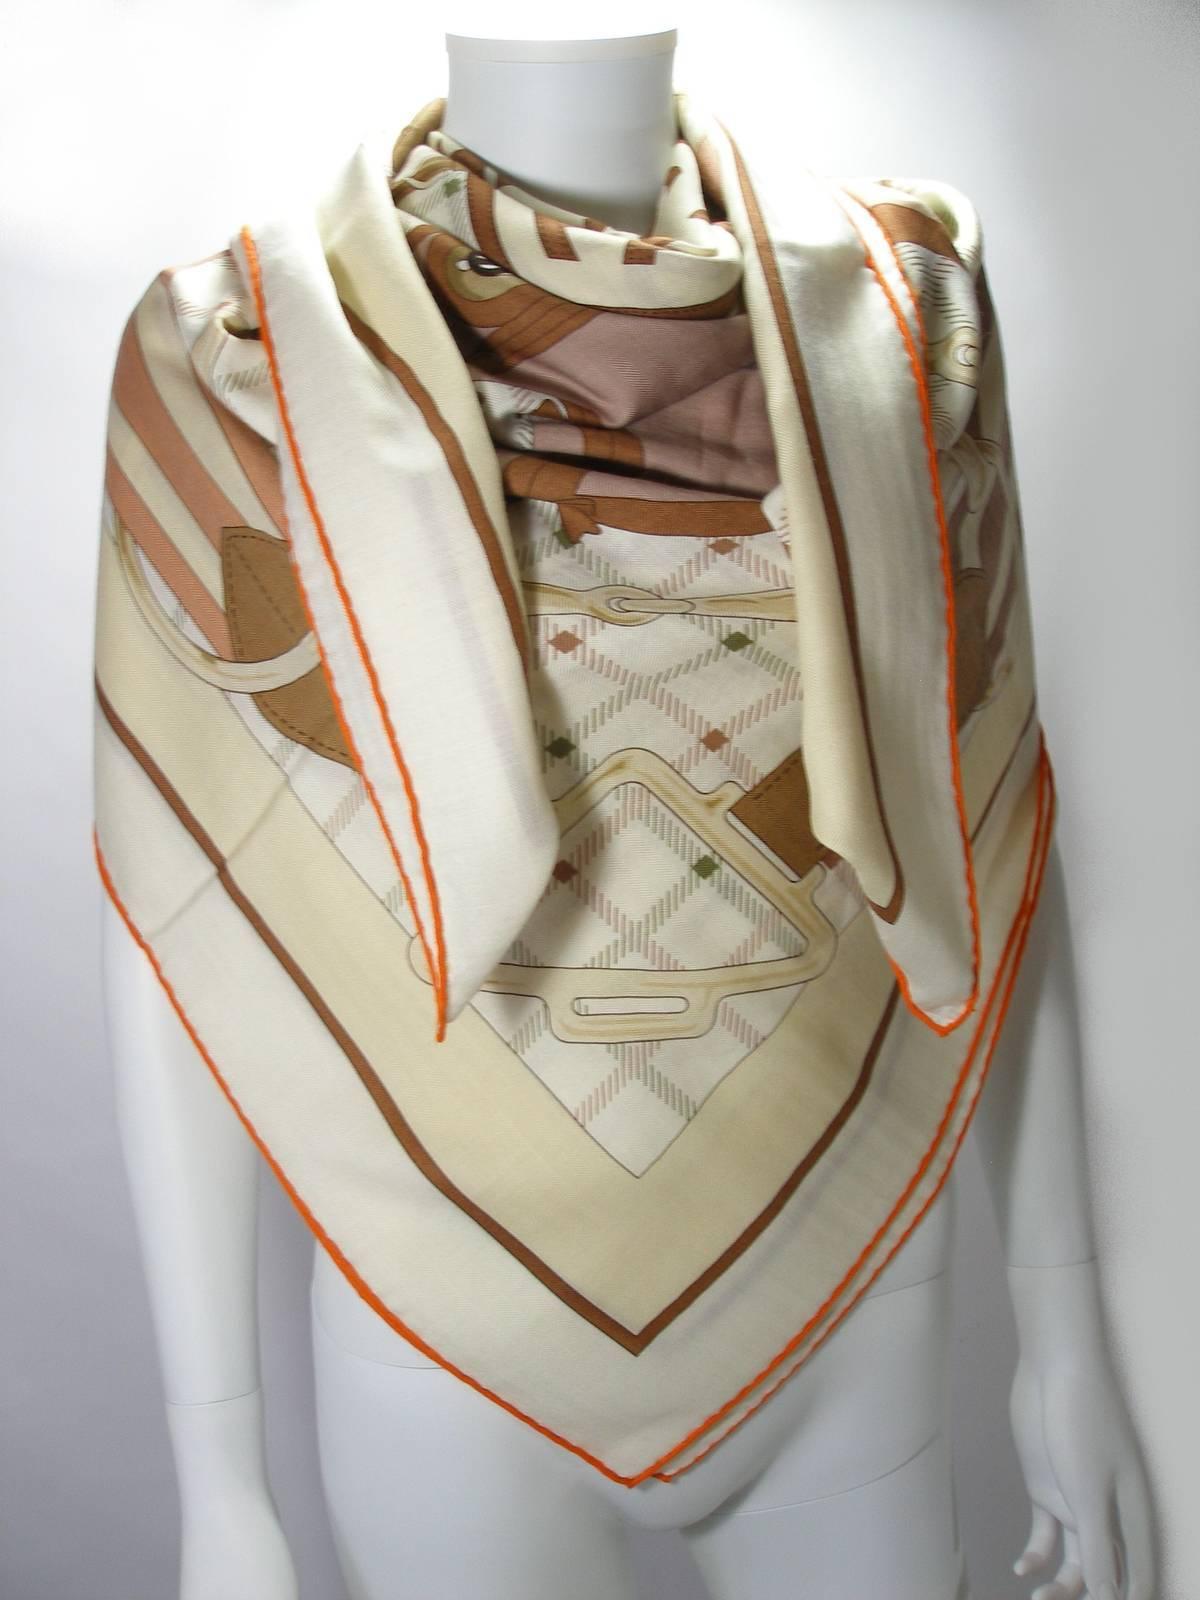 Hermès Tatersale
Silk 30% and cachemire 70%
Designed by Henri D'Origny
Actual Collection
Size 140 cm x 140 cm 
Copyright and Signature 
Color : Créme / Brown
Sorry no Box , it's comes with Hermès shopping bag and ribbon .
Thank you for visiting my